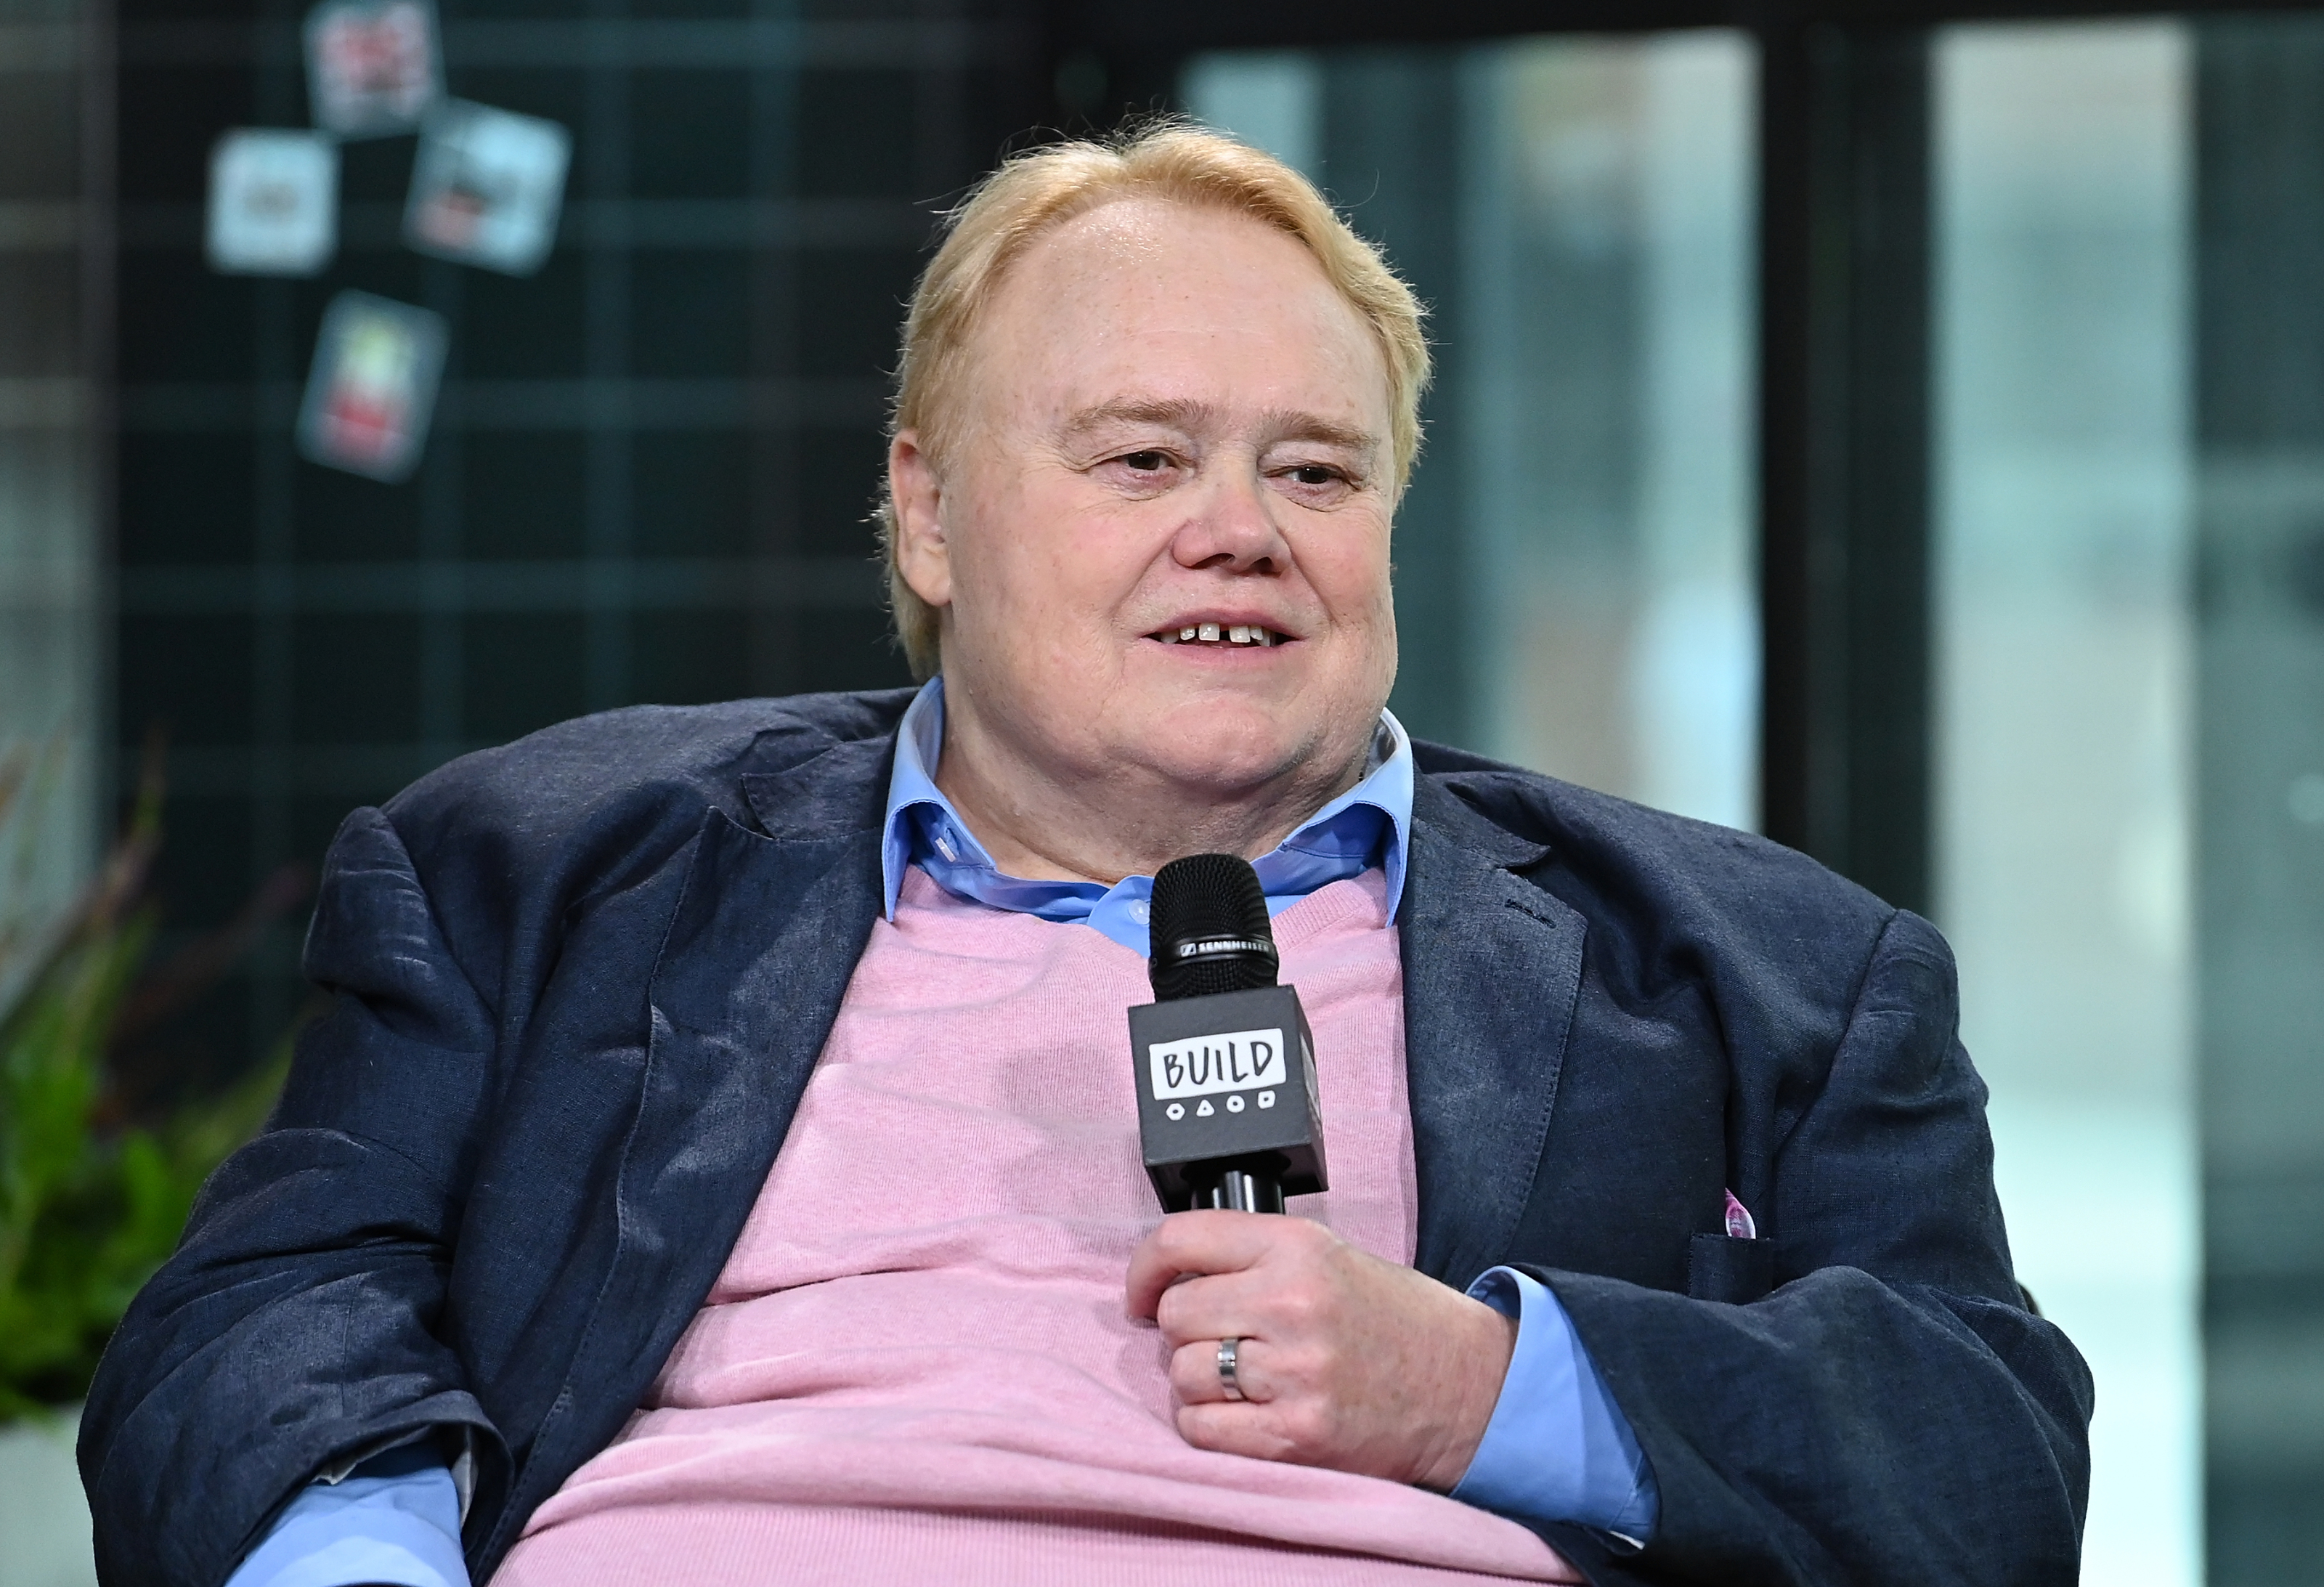 Louie Anderson on His Extraordinary New Role as a Woman on Baskets